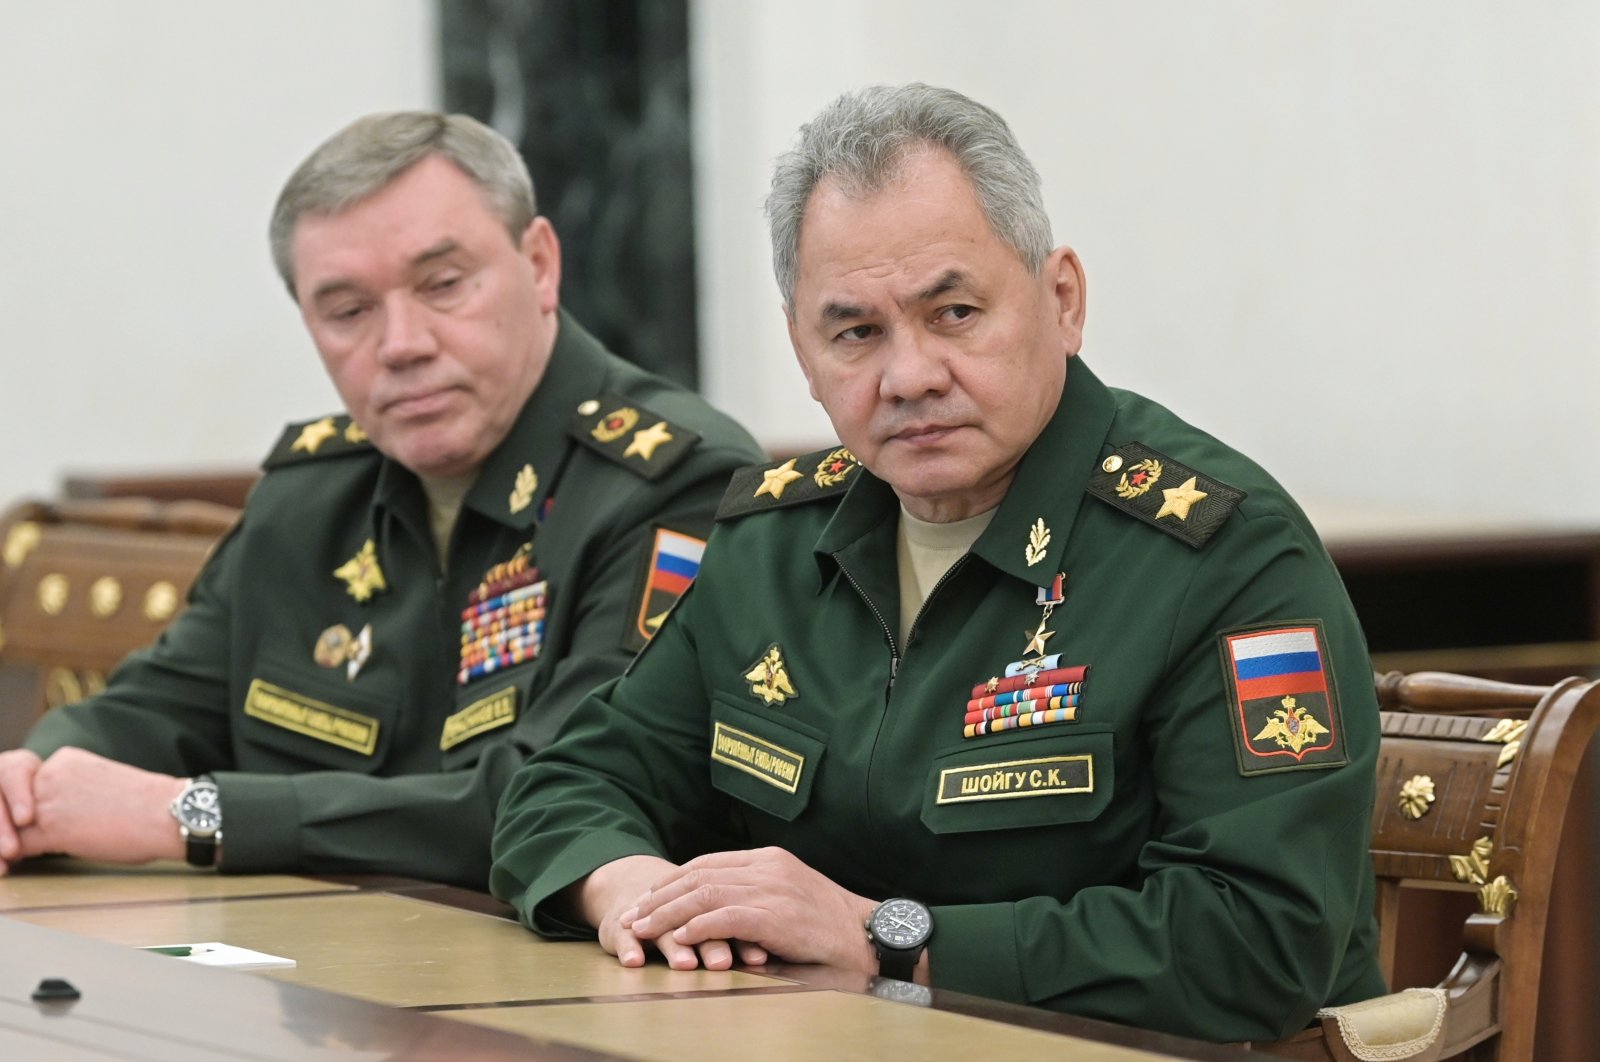 Russian Defense Minister Sergei Shoigu (R) and Head of the General Staff of the Armed Forces of Russia and First Deputy Defense Minister Valery Gerasimov listen to Russian President Vladimir Putin during their meeting in Moscow, Russia, Feb. 27, 2022. (AP Photo)